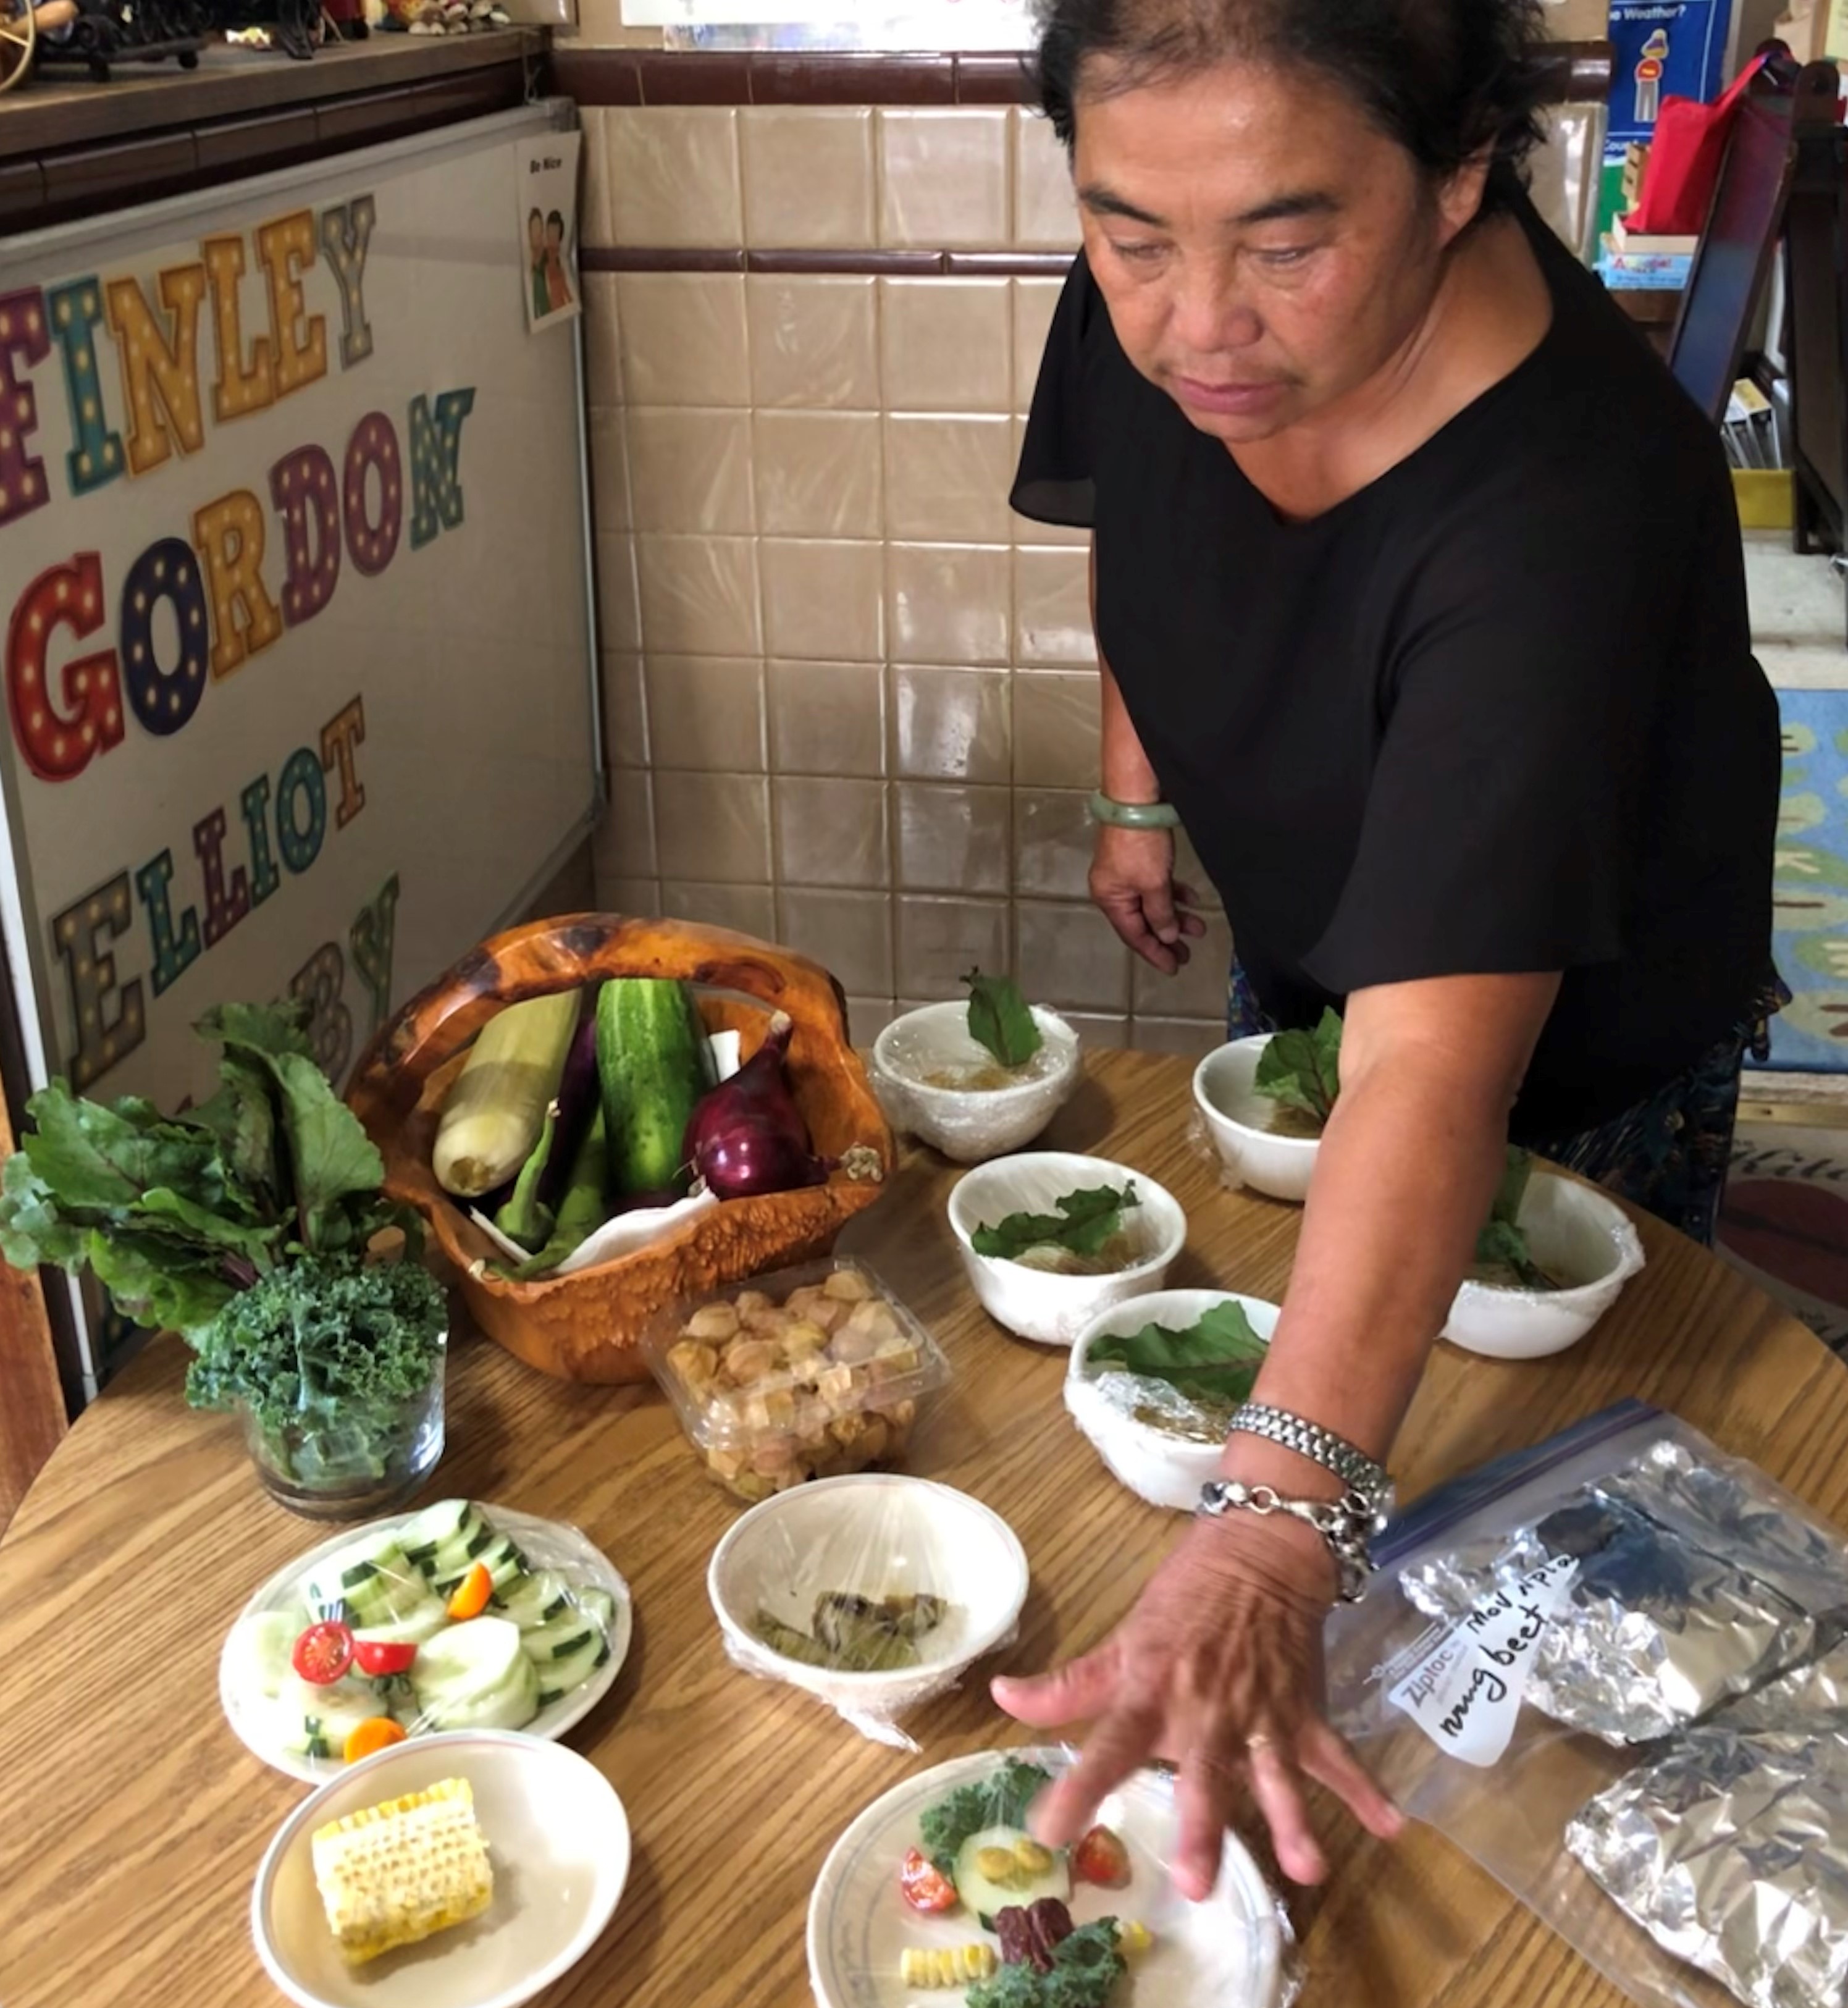 Souvanh Thao presents plates of food